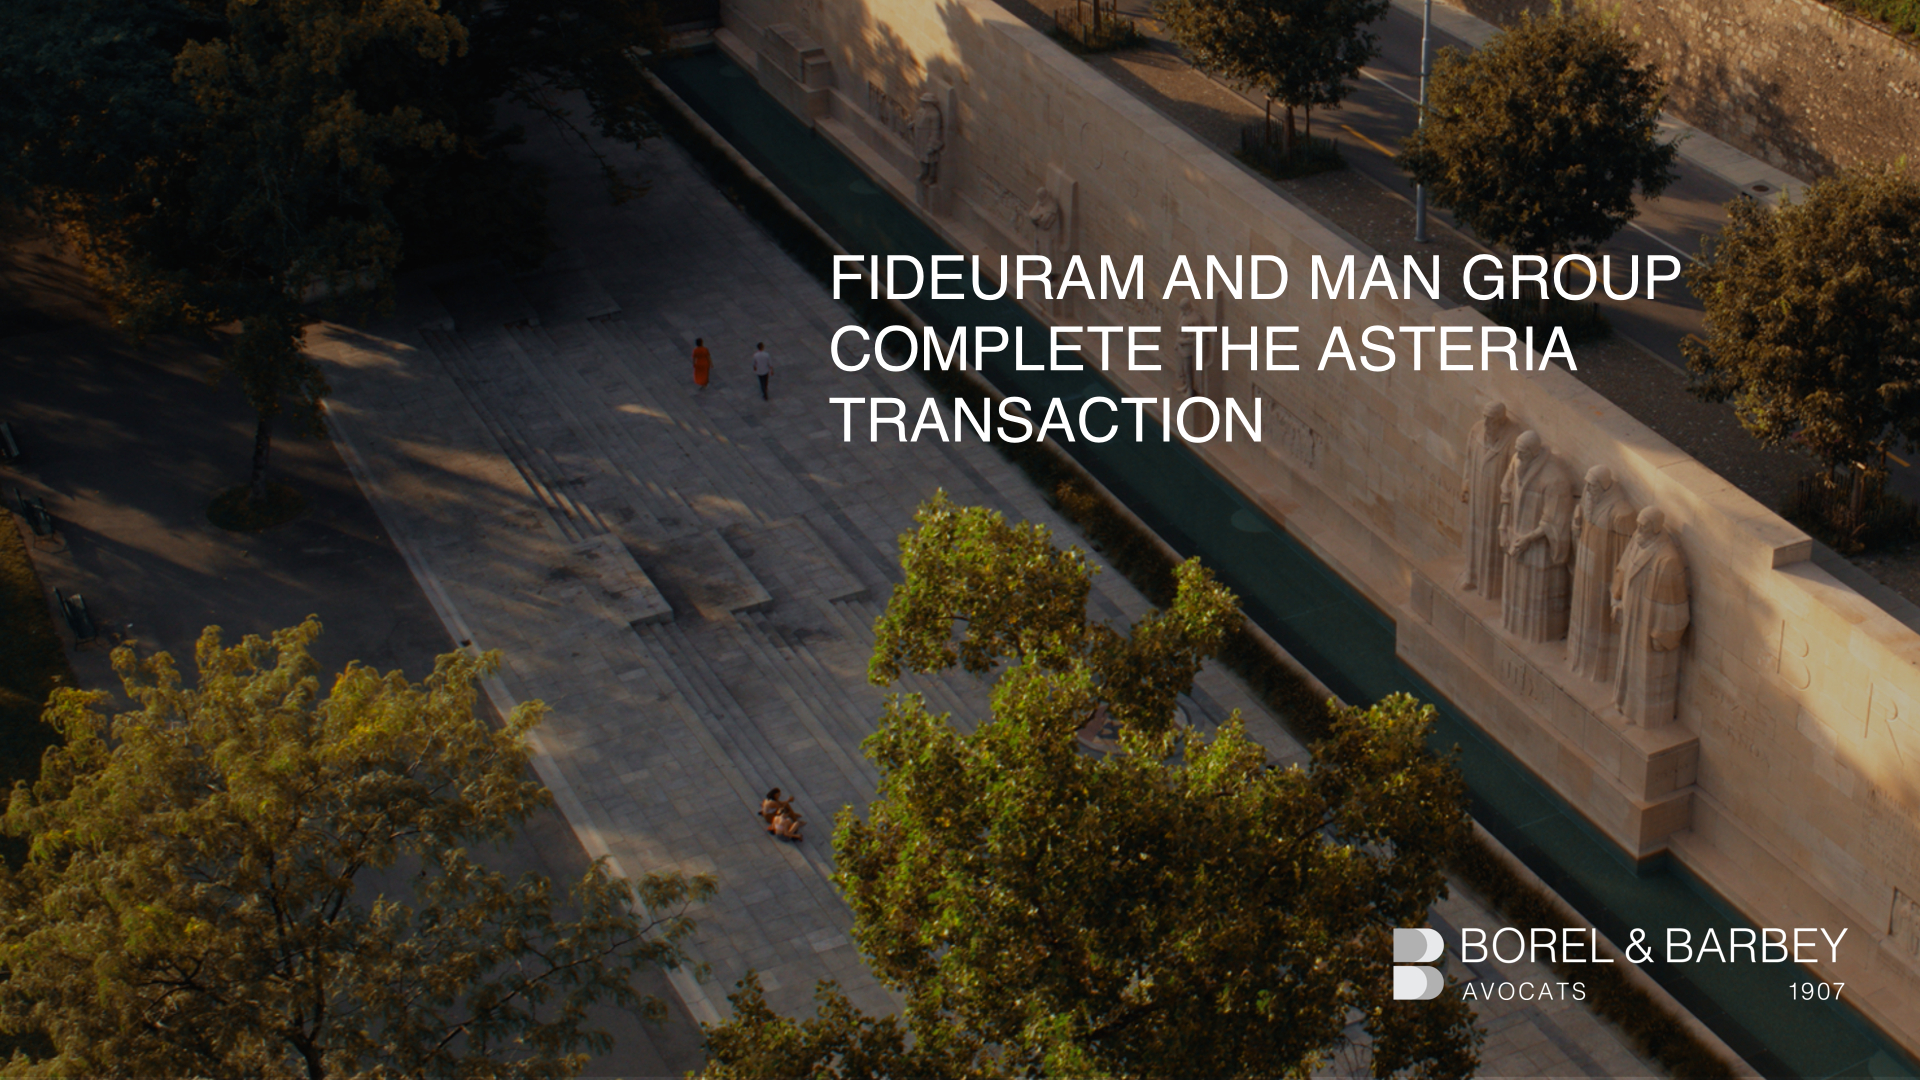 Fideuram and Man Group become partners in Asteria